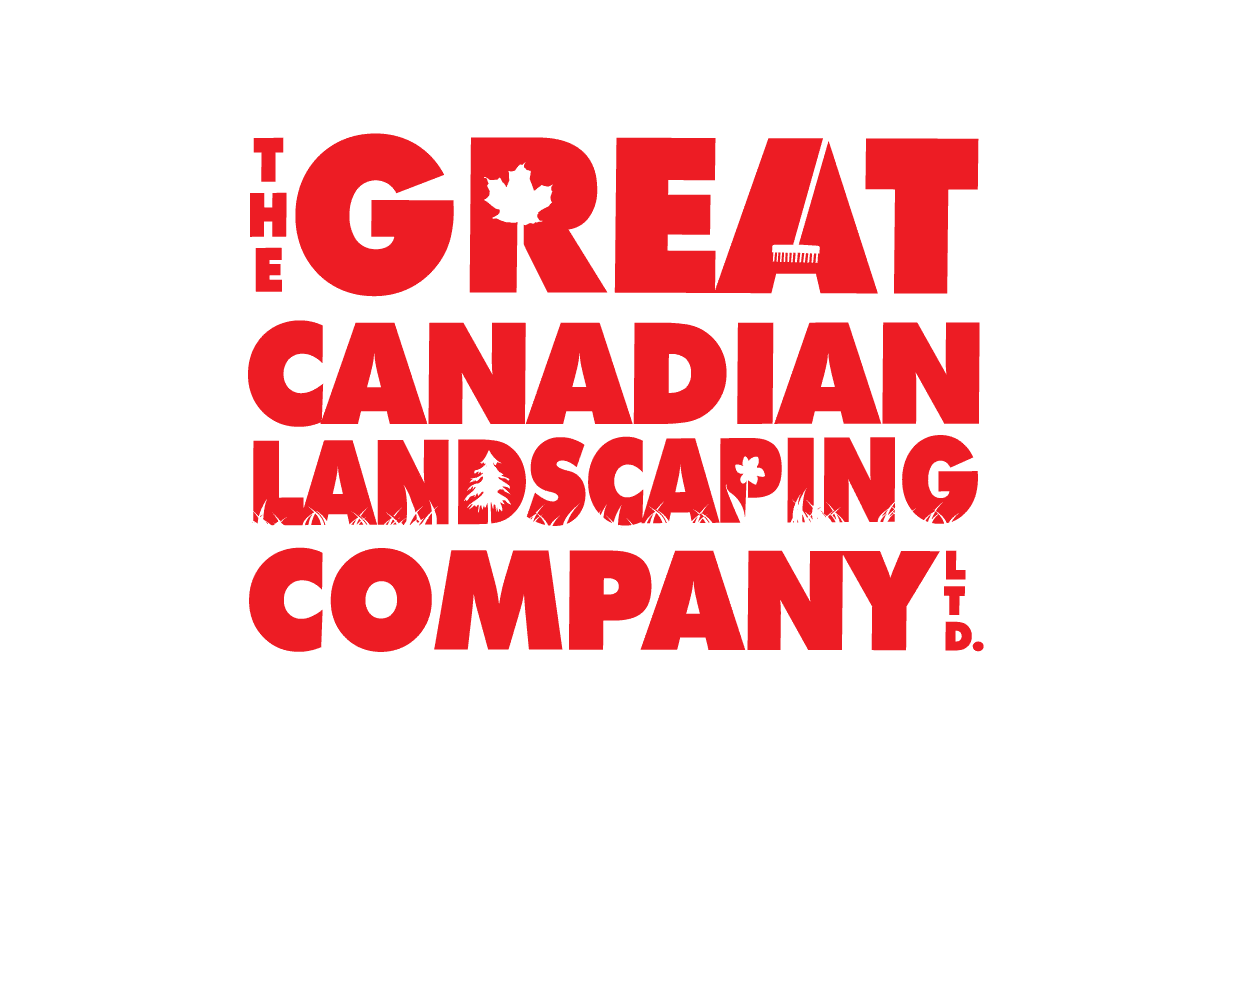 The Great Canadian Landscaping Company